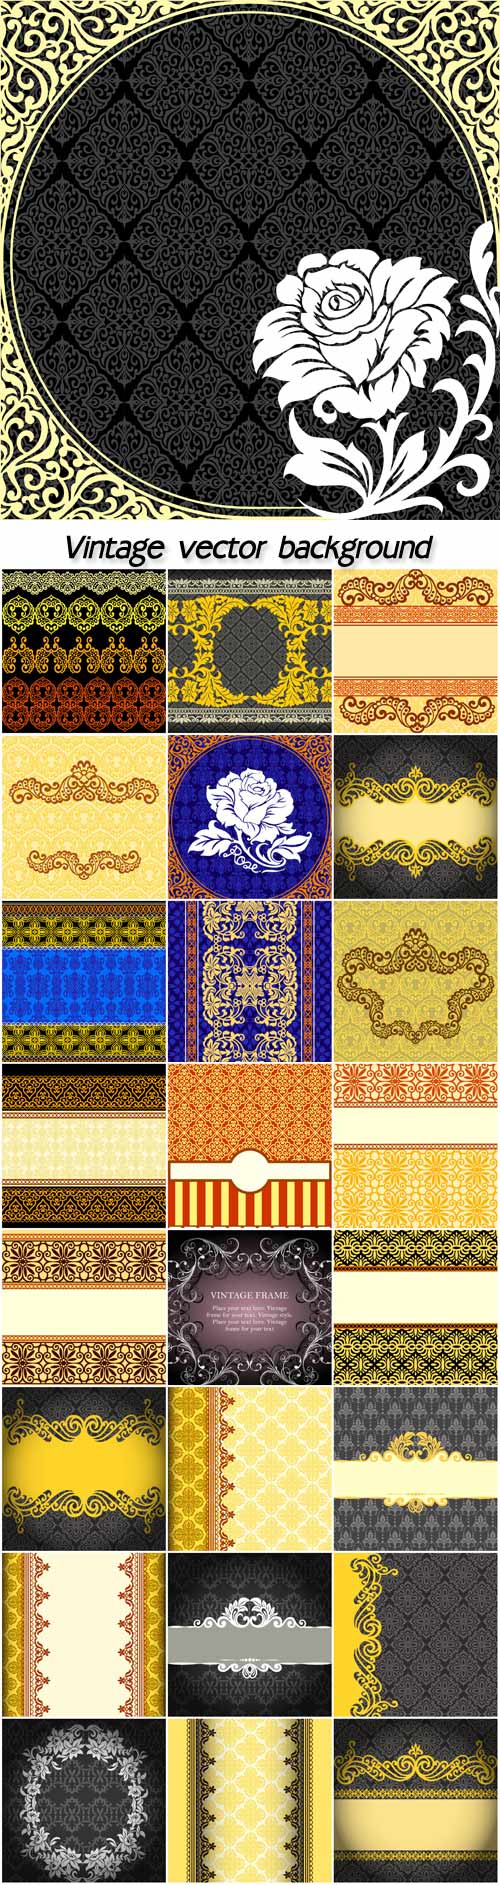 Vintage backgrounds, vector patterns and ornaments